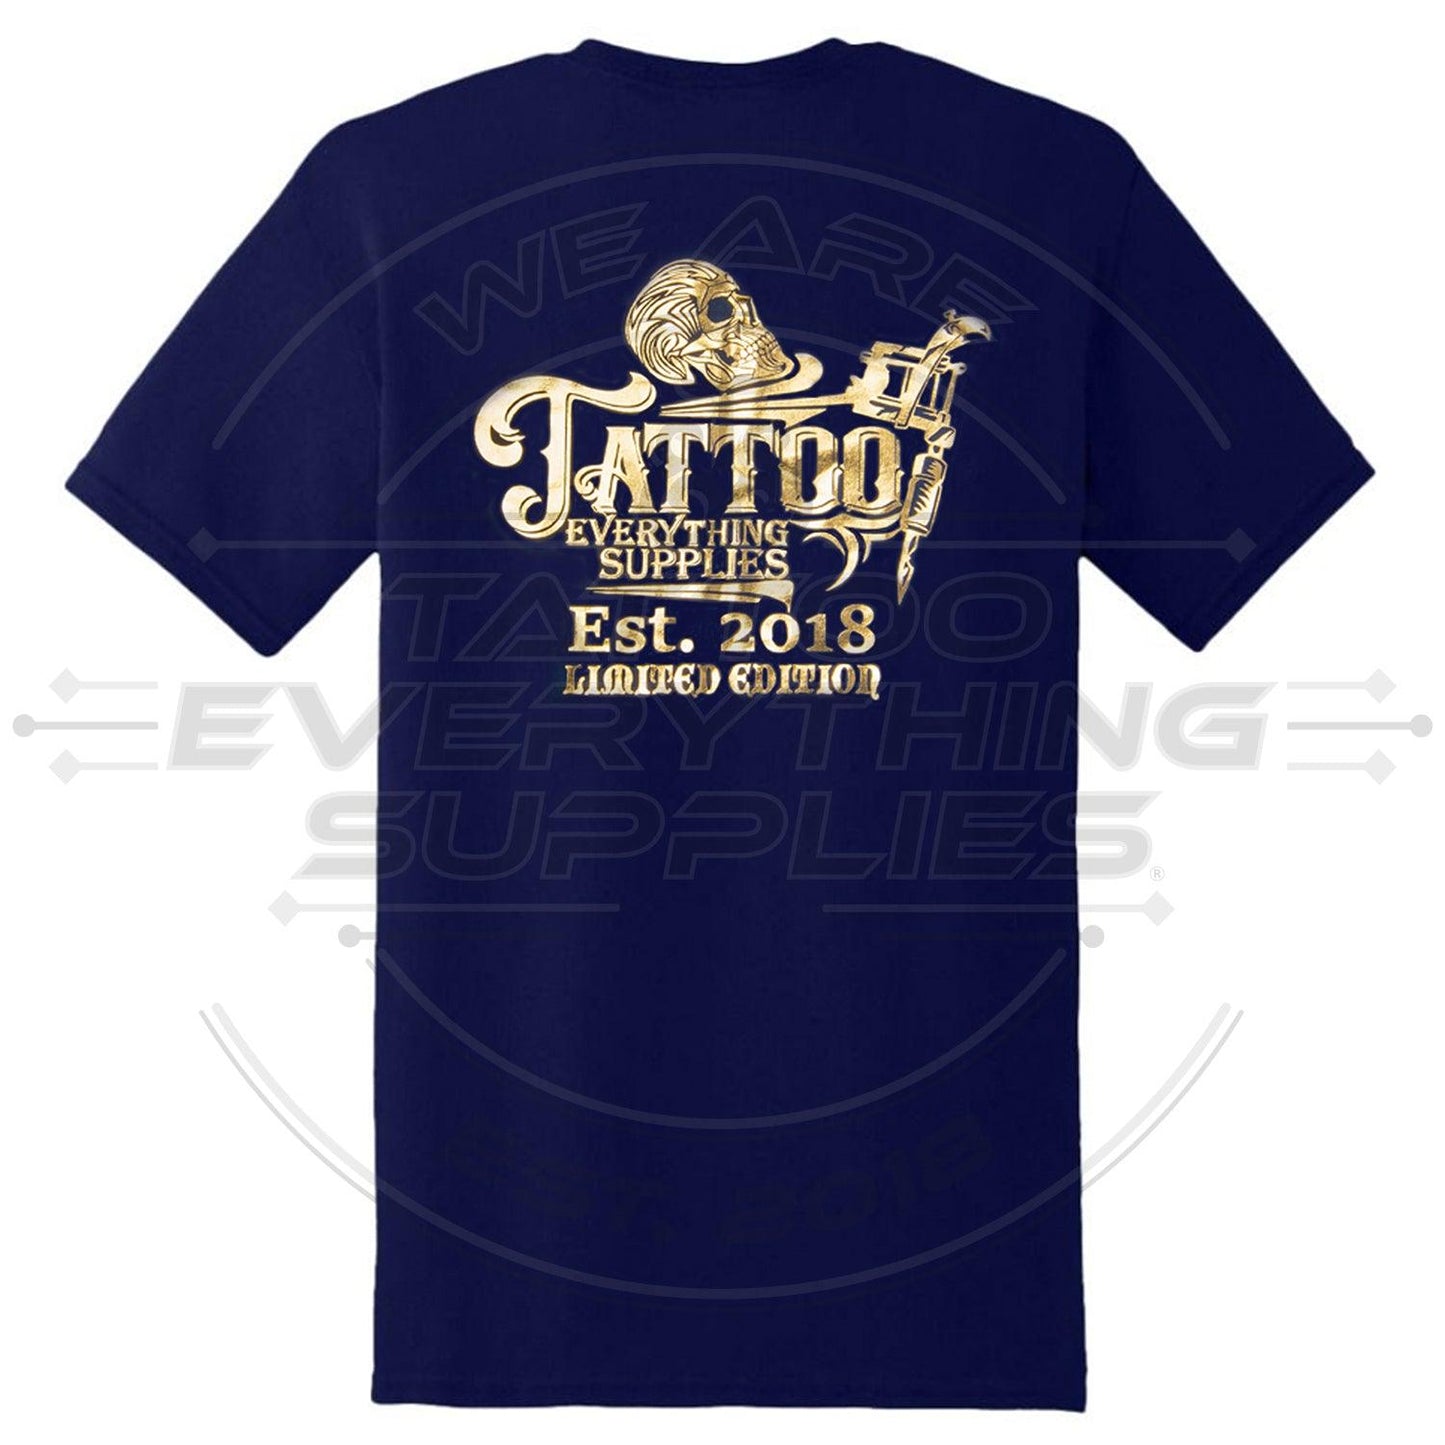 Tattoo Everything Supplies - T-Shirt - Limited Navy/Gold - WAS £15 PLUS VAT